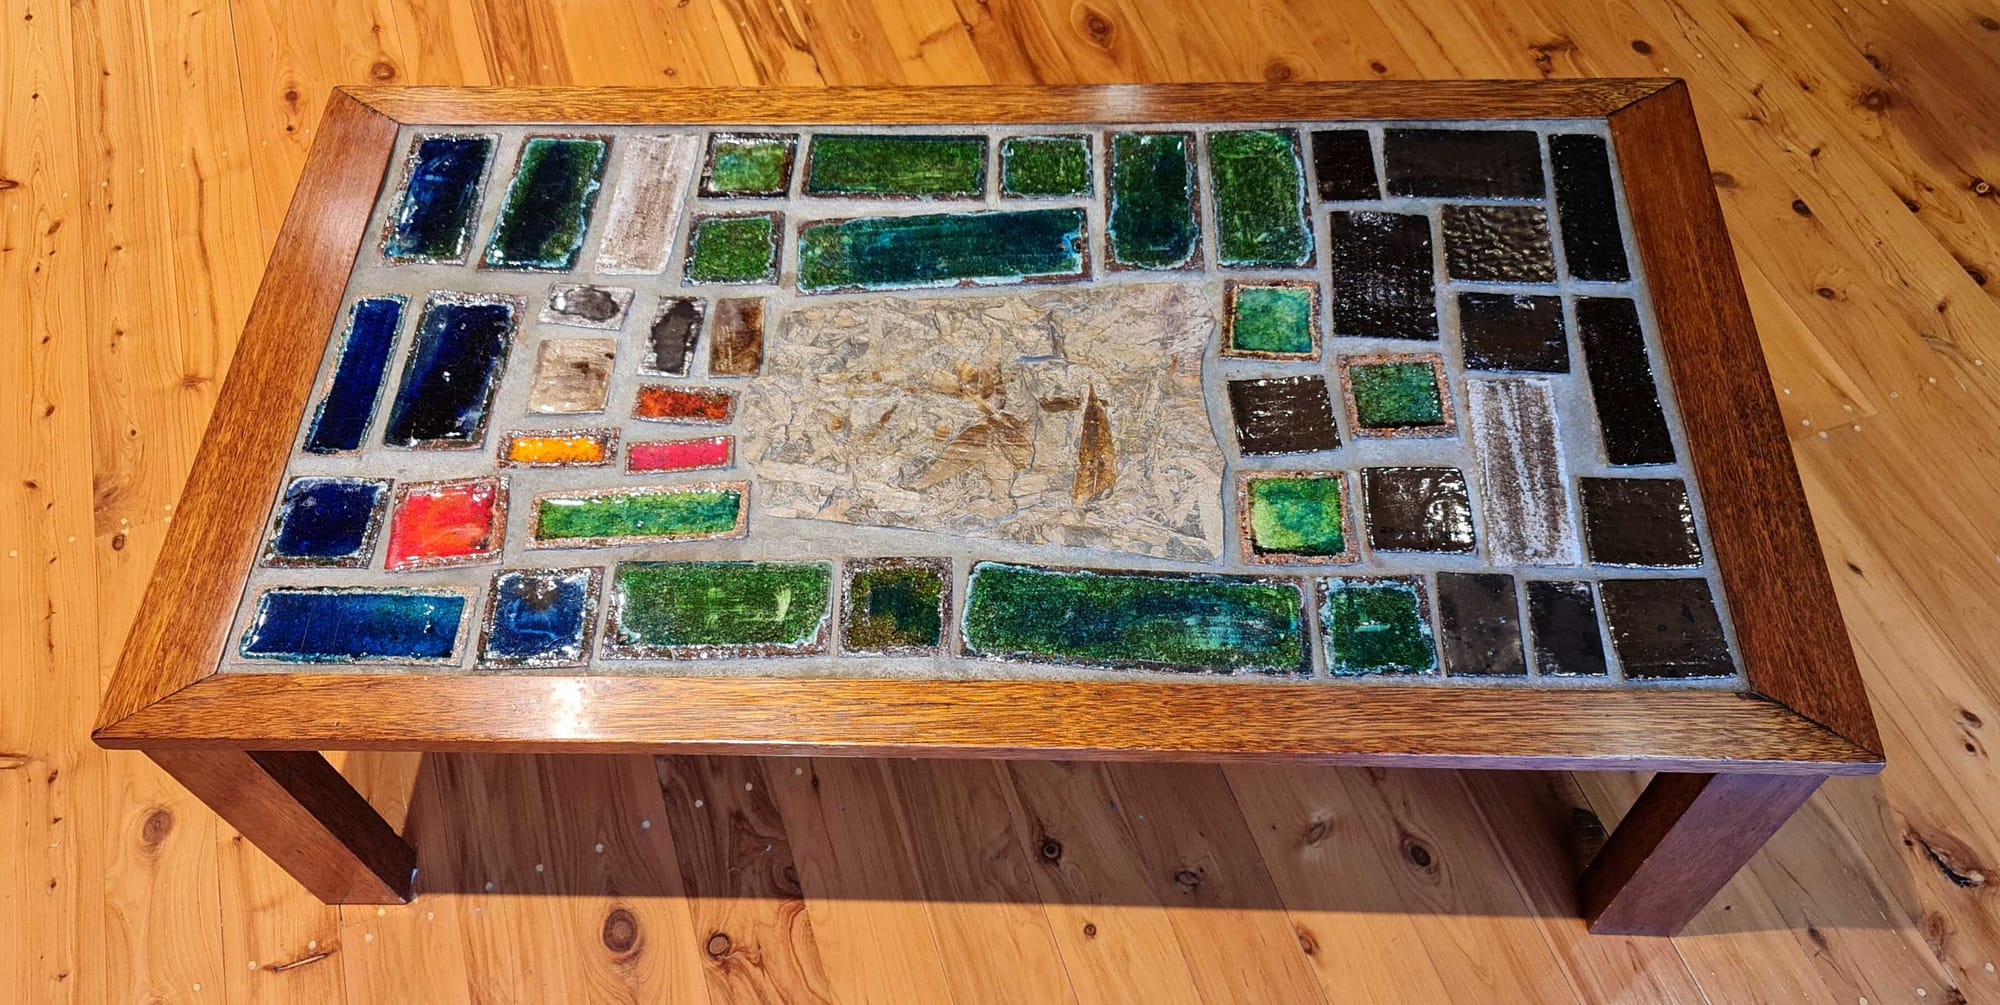 Coffee Table, 1975, wood frame, ceramic/glass tiles, fossil centrepiece